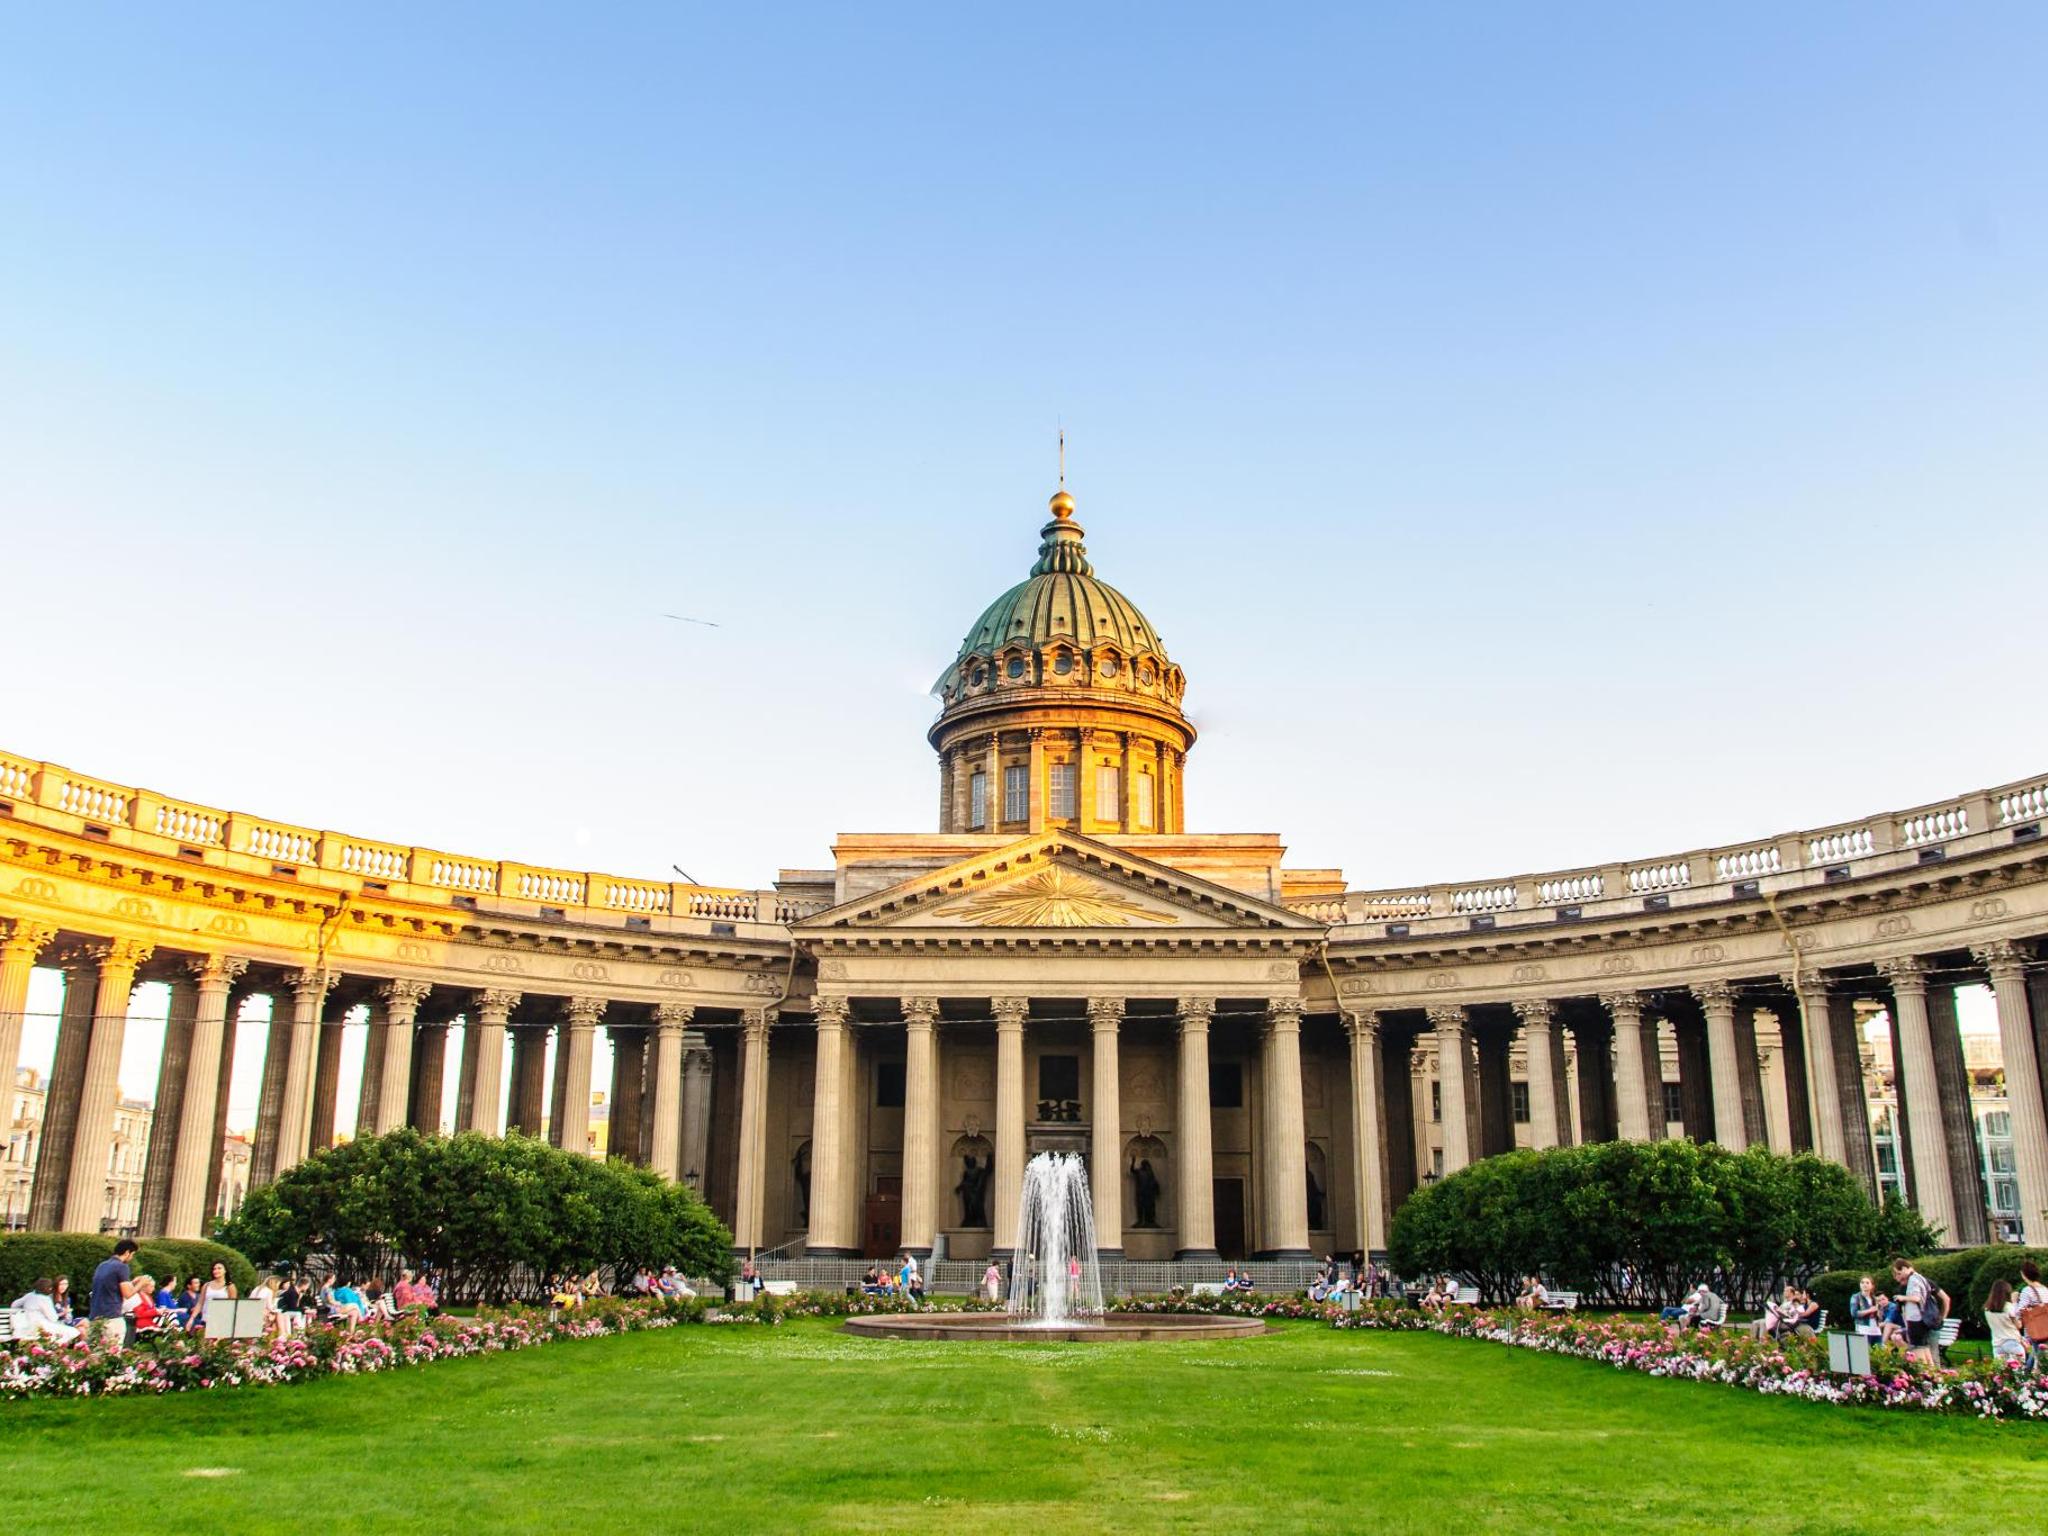 Where to stay near St Petersburg's Kazan Cathedral | Booking.com